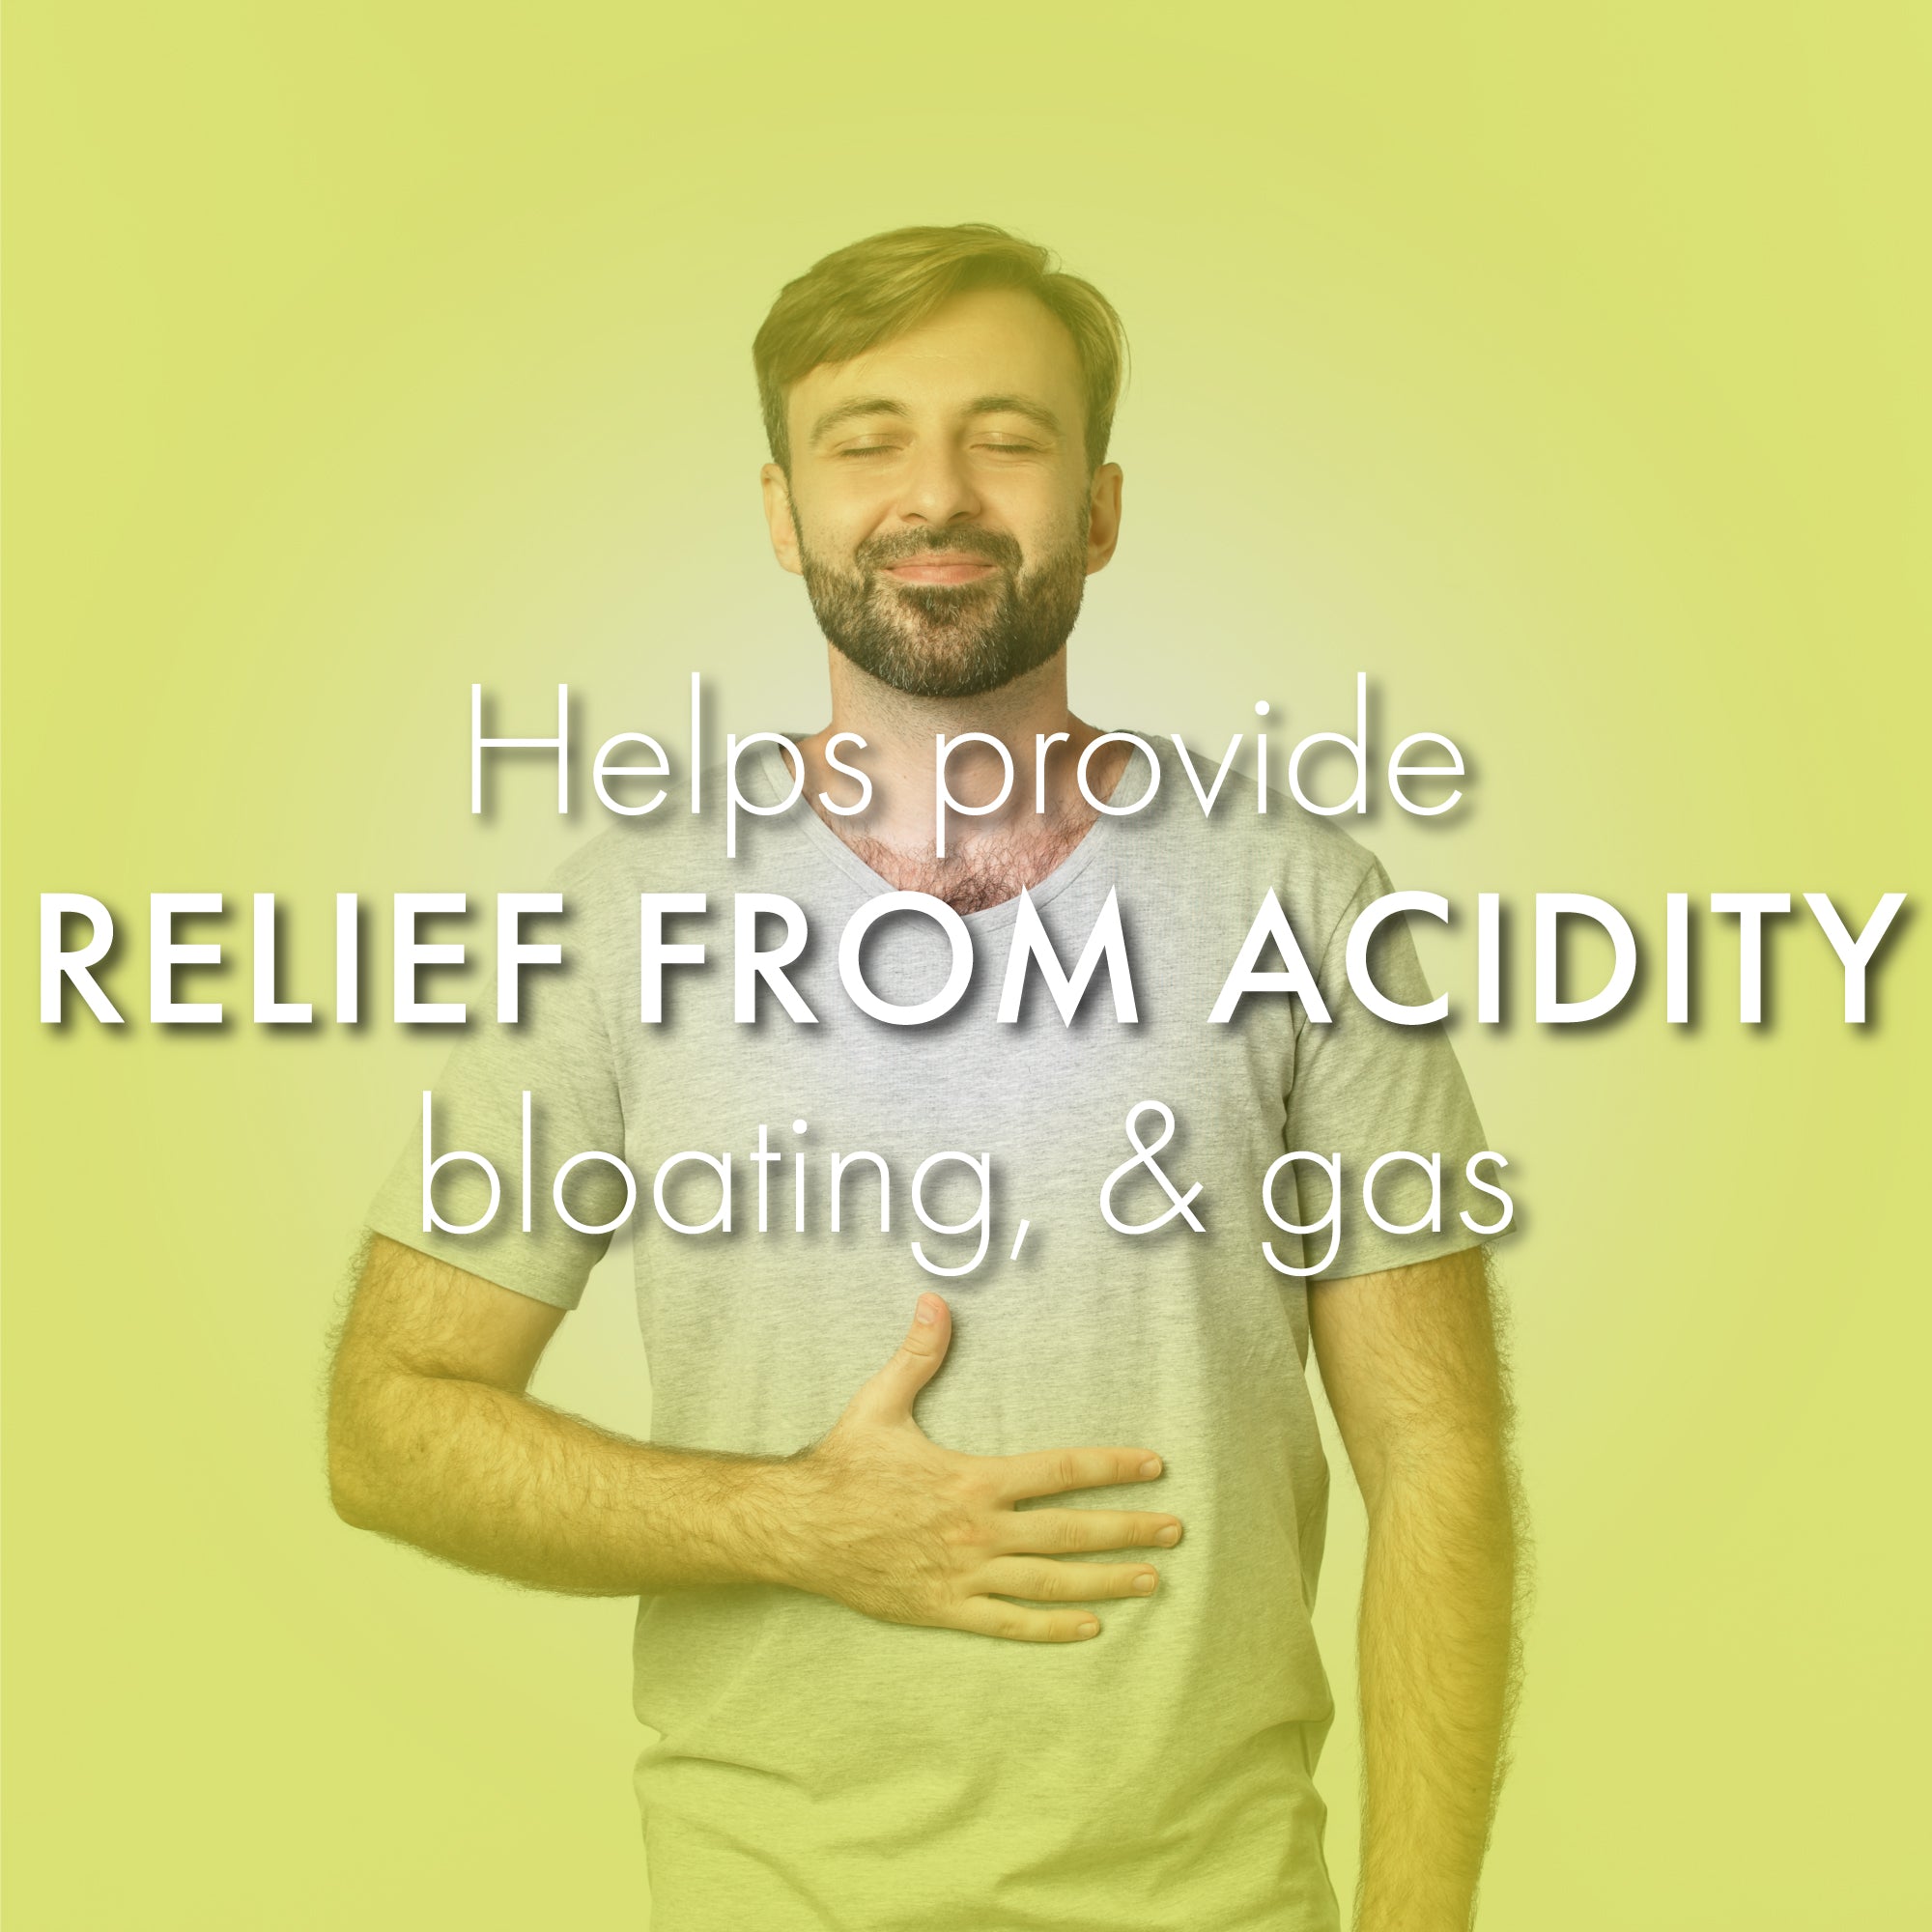 Acidity Care Effervescent Tablets: Fast Relief from Acidity, Bloating, and Upset stomach